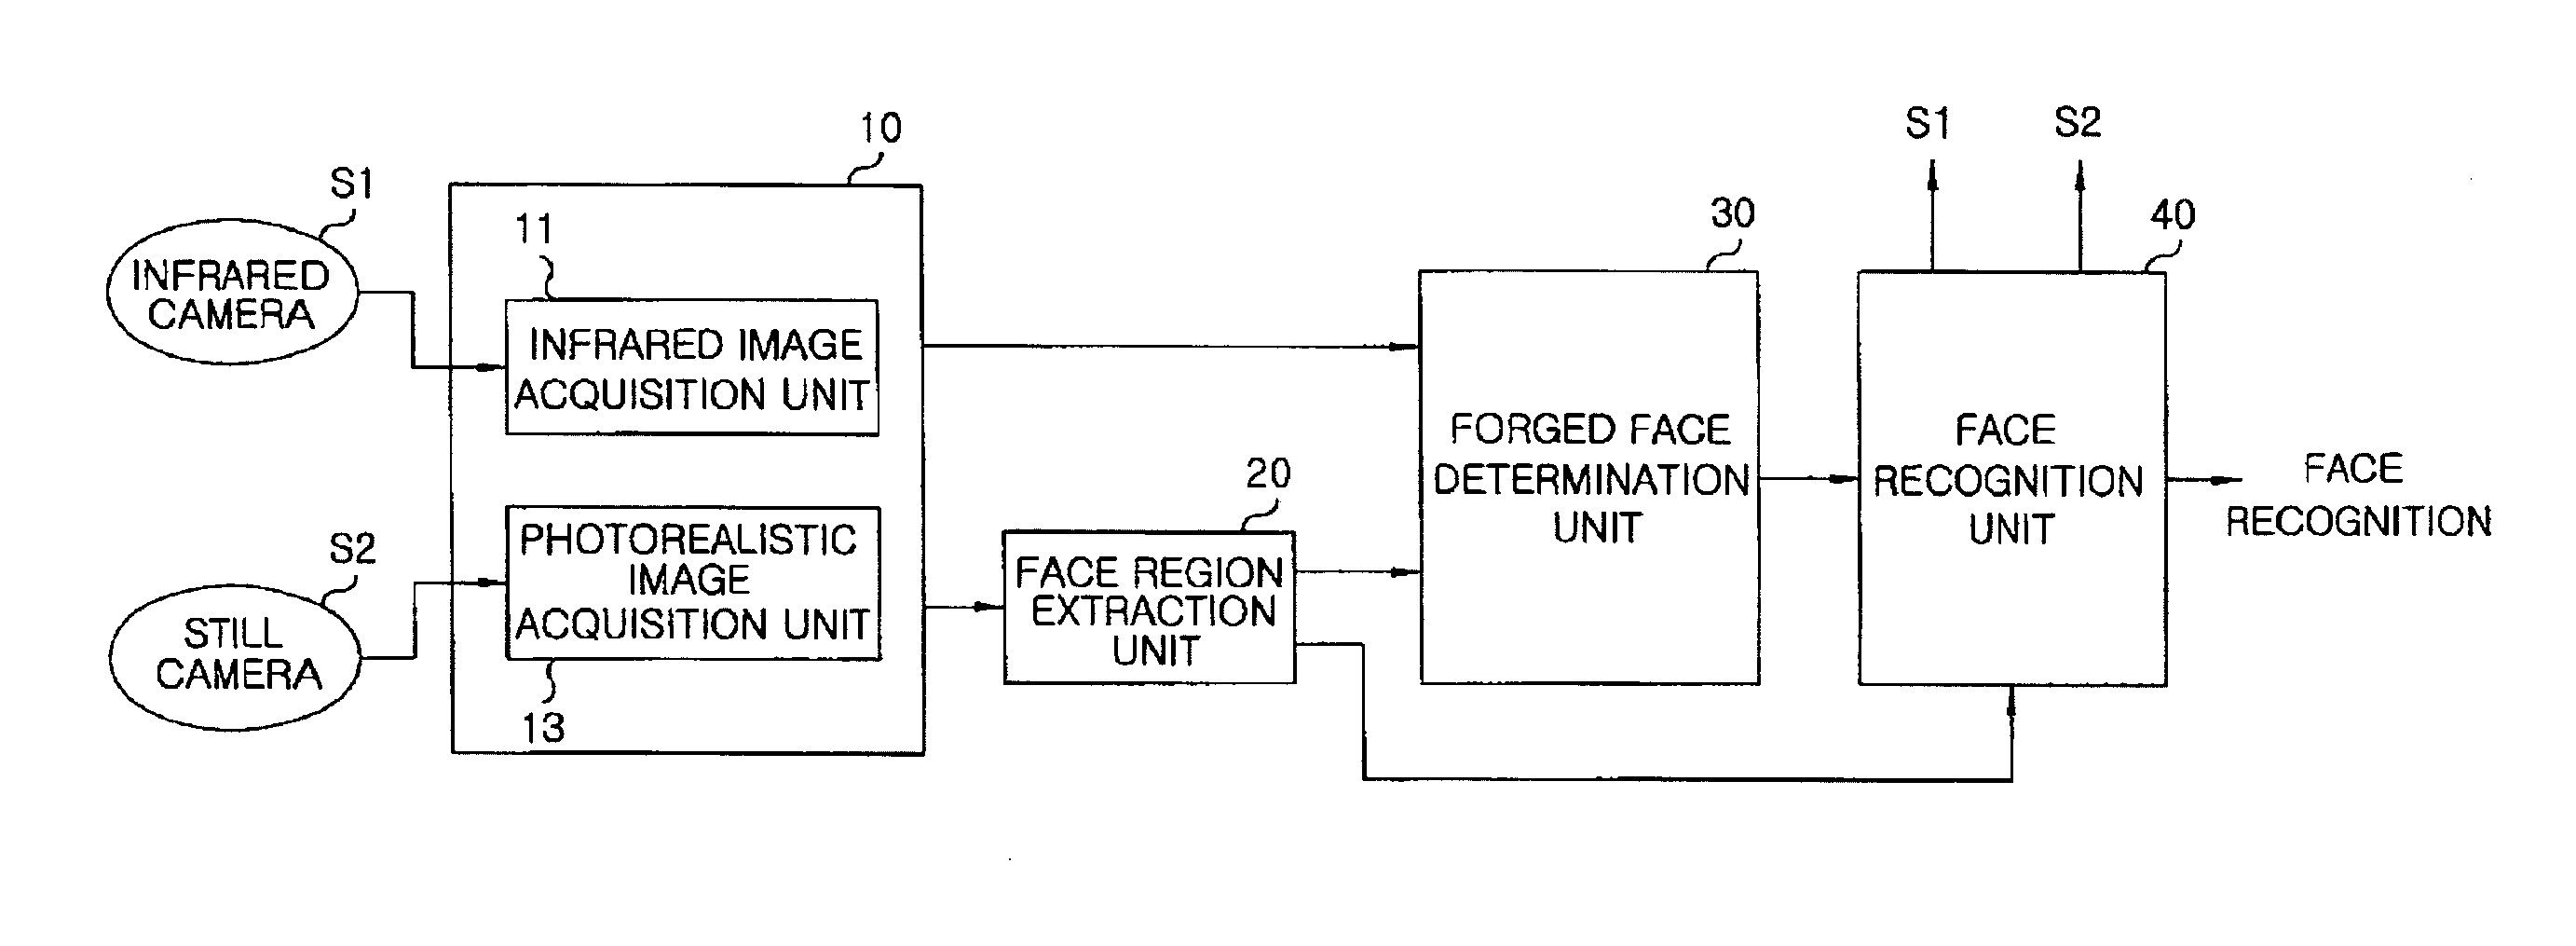 Method and apparatus for detecting forged face using infrared image